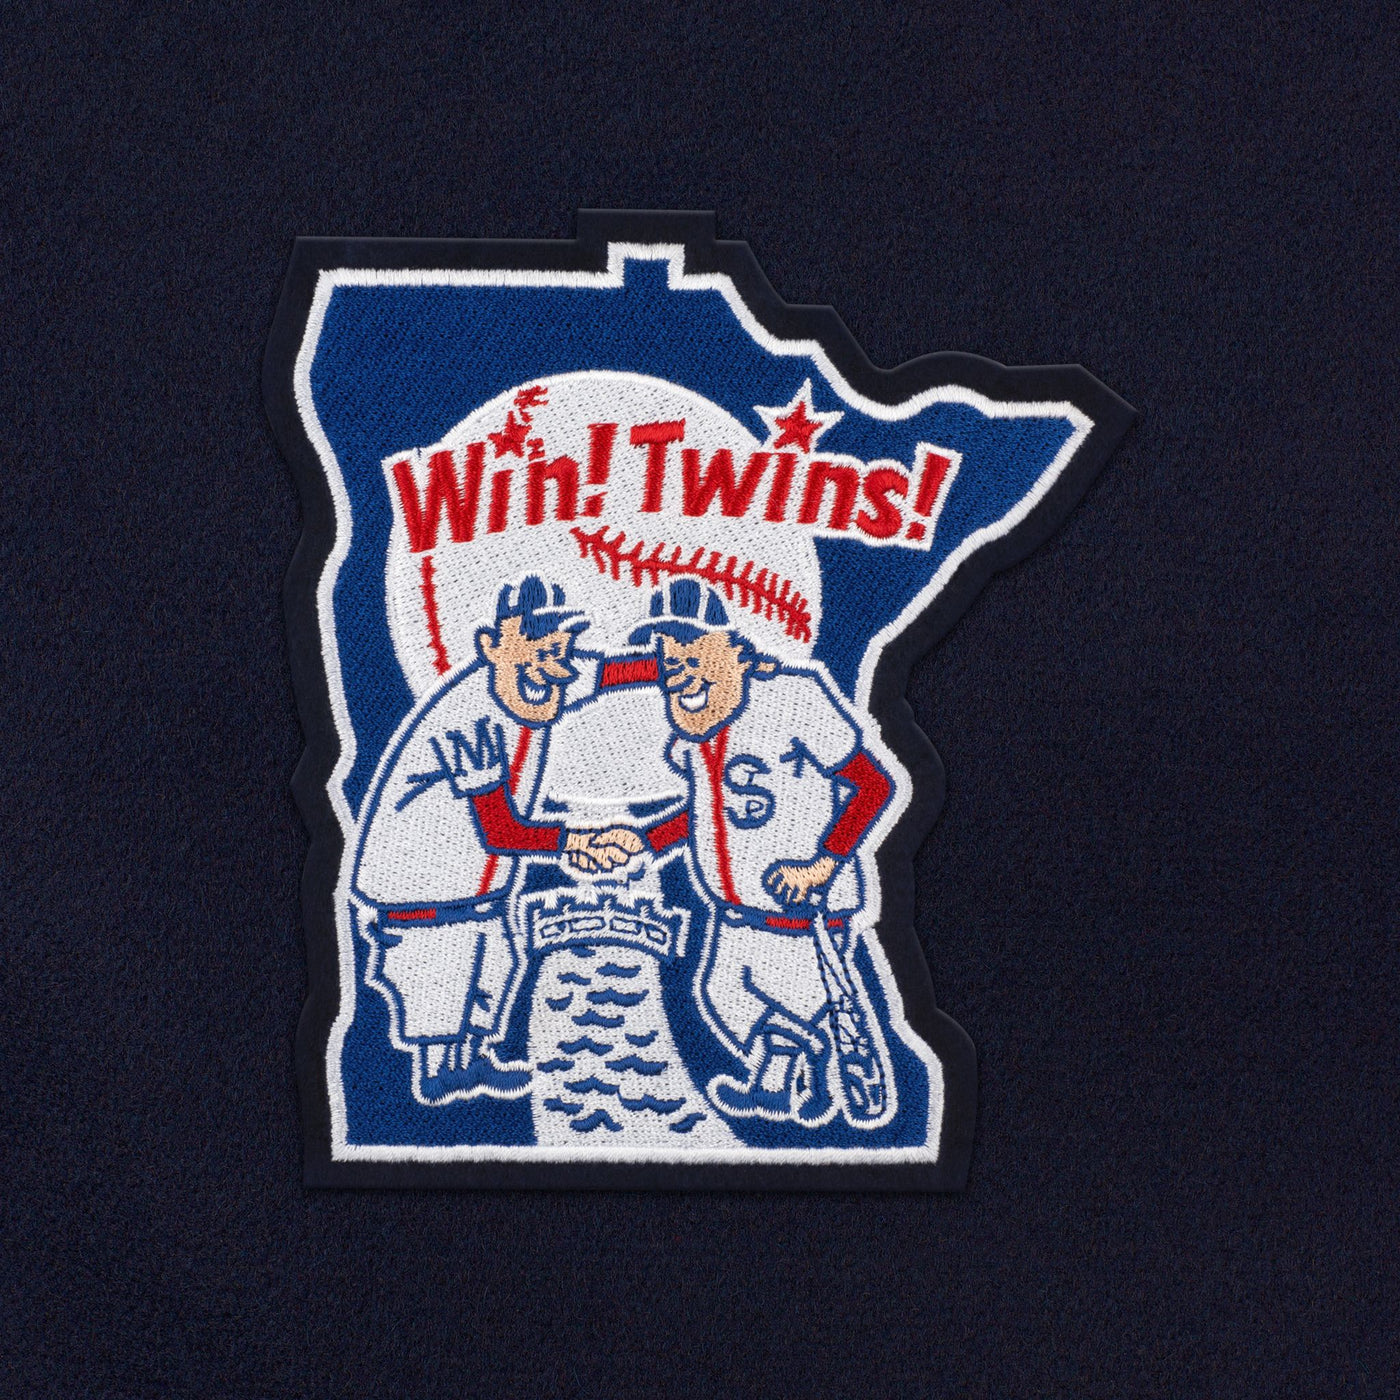 Minnesota Twins Cooperstown Collection "Win! Twins!" Weekender